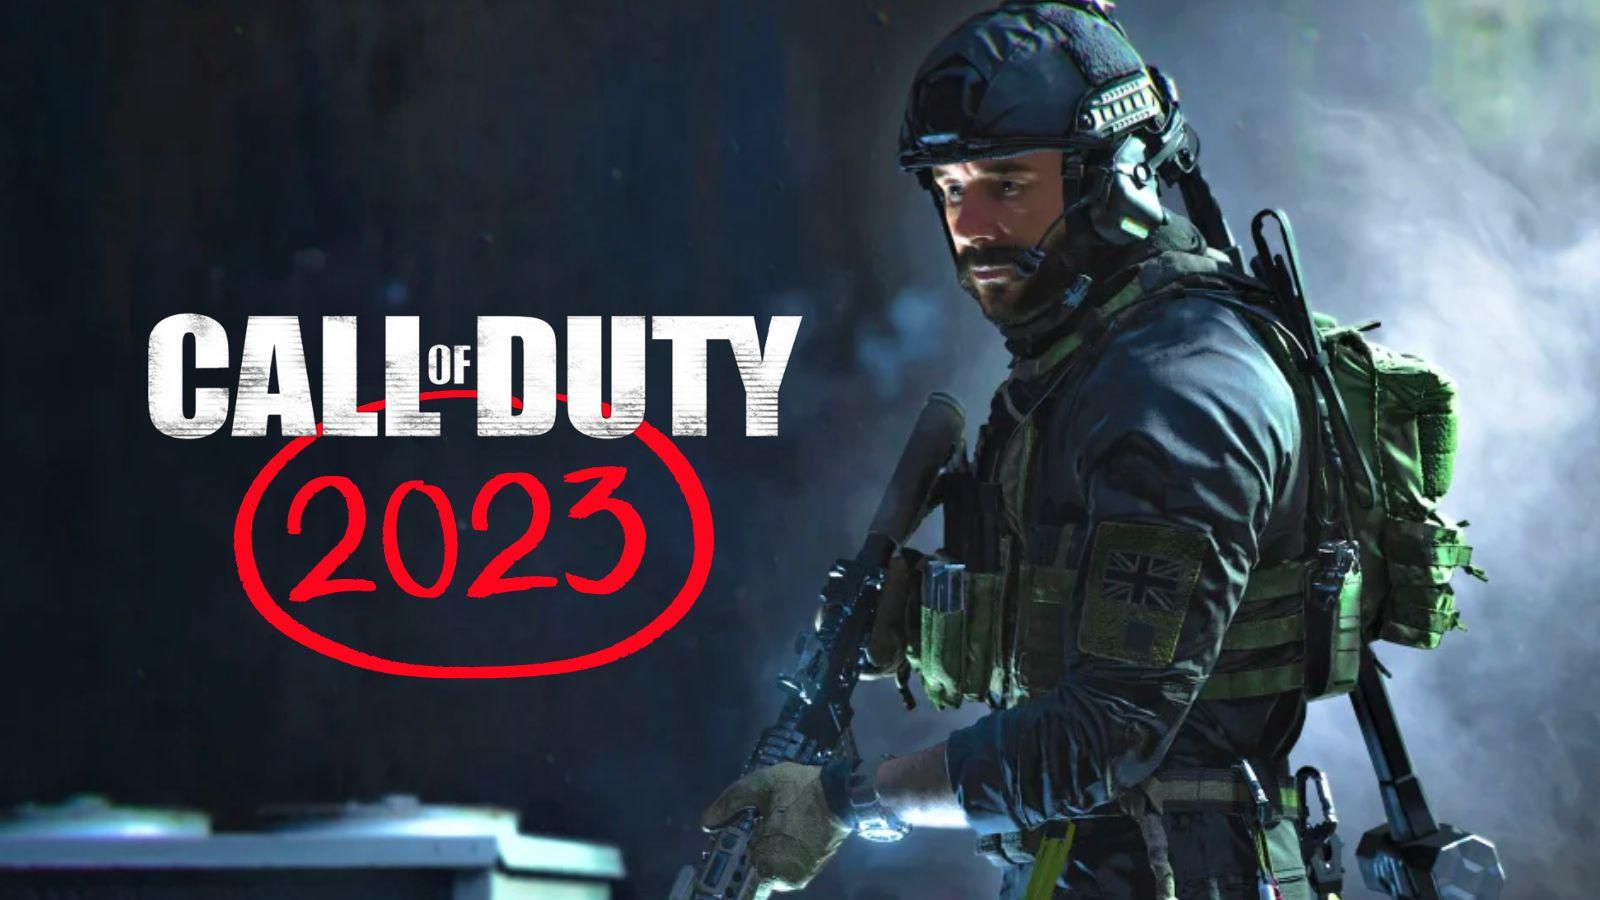 Call of Duty 2023 is delayed, but more CoD is coming in 2023